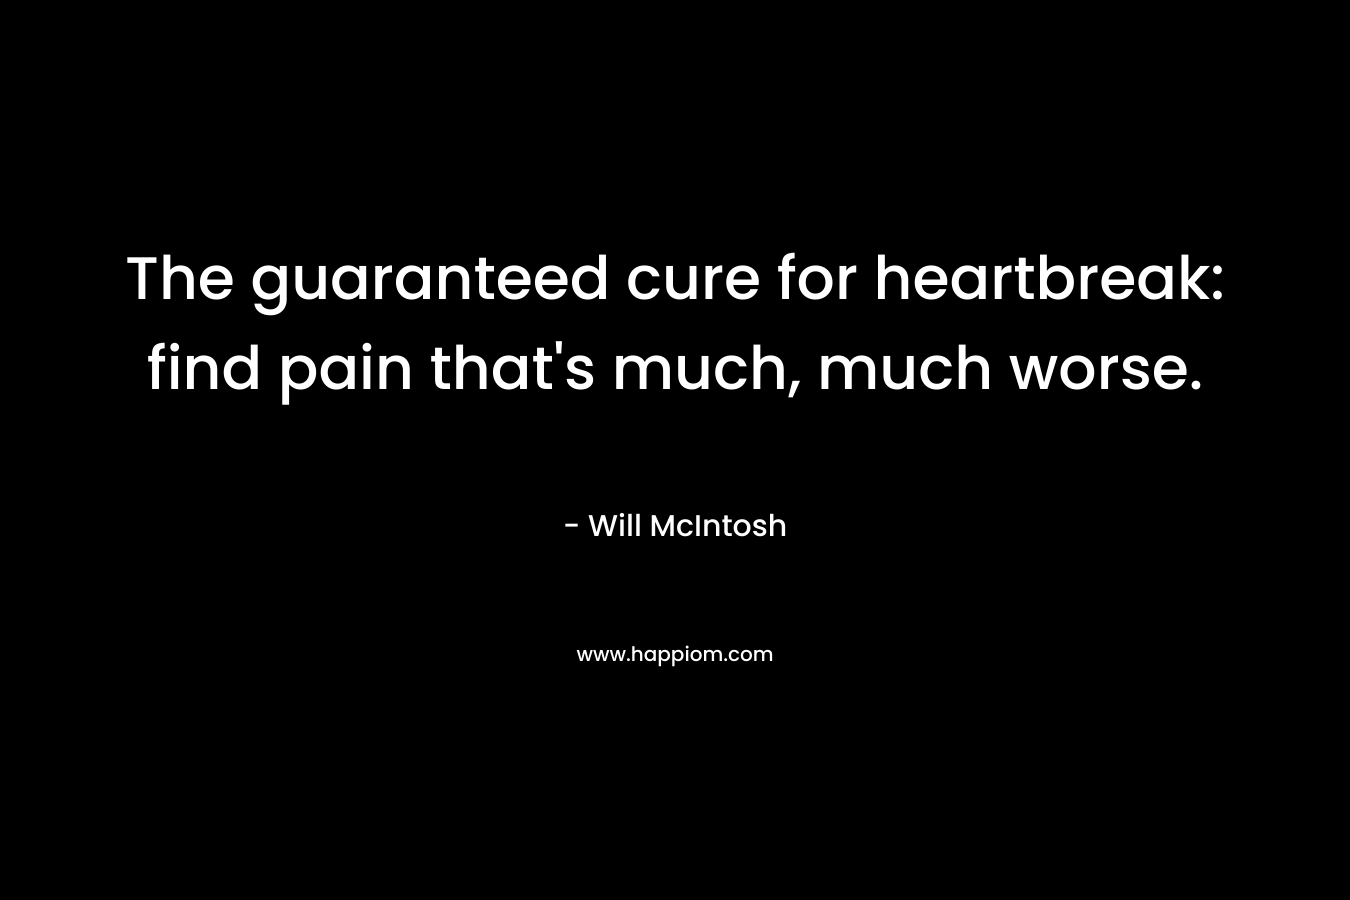 The guaranteed cure for heartbreak: find pain that's much, much worse.